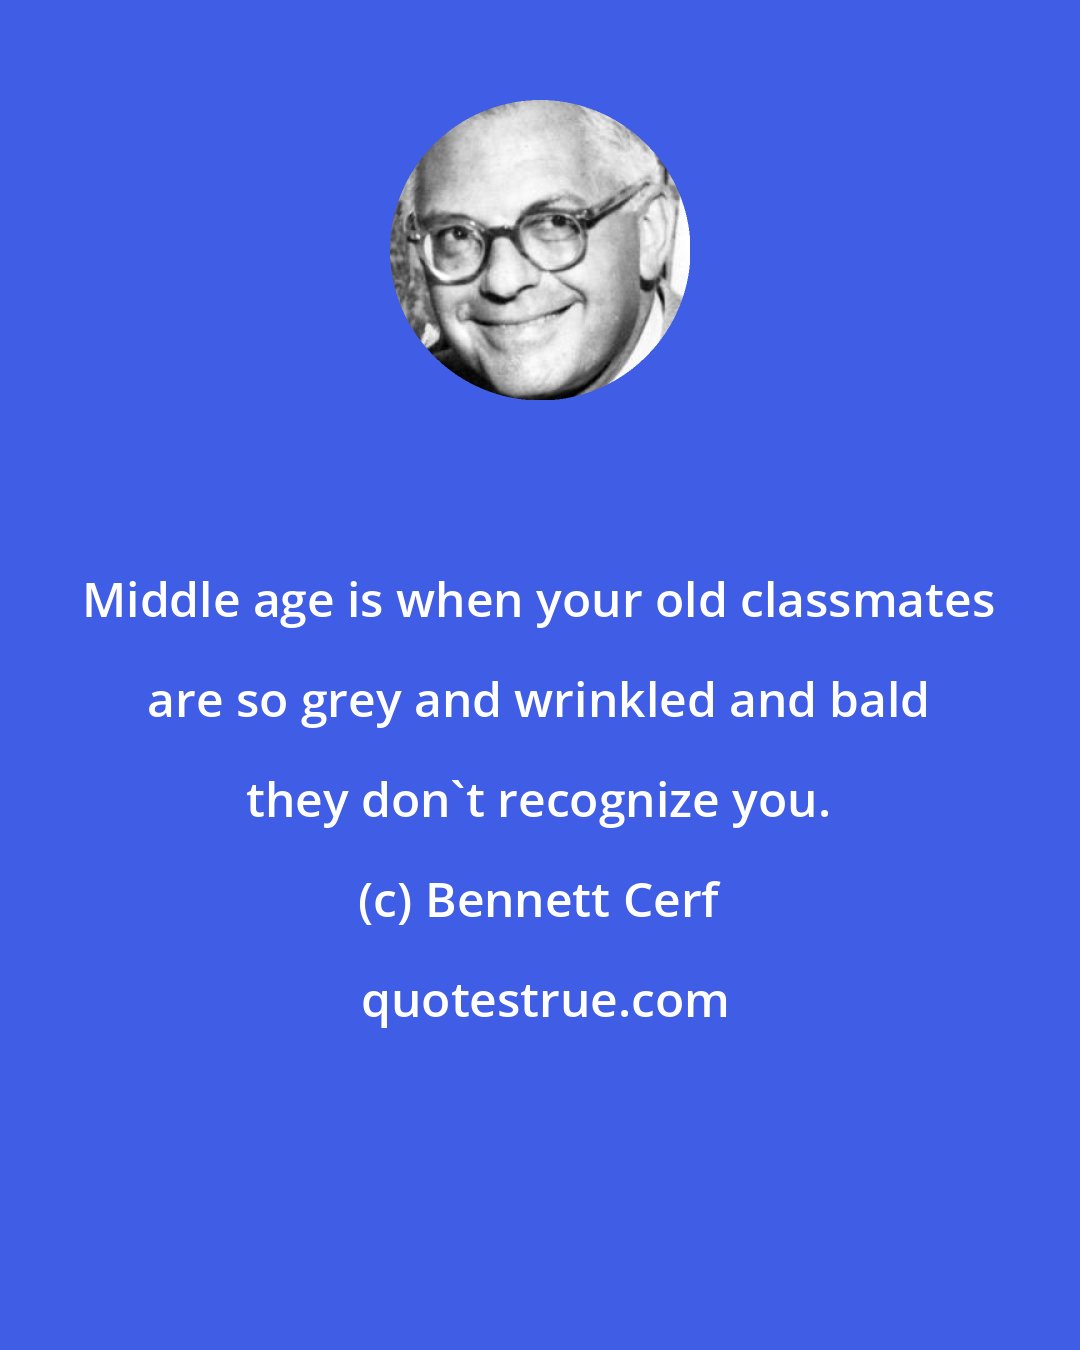 Bennett Cerf: Middle age is when your old classmates are so grey and wrinkled and bald they don't recognize you.